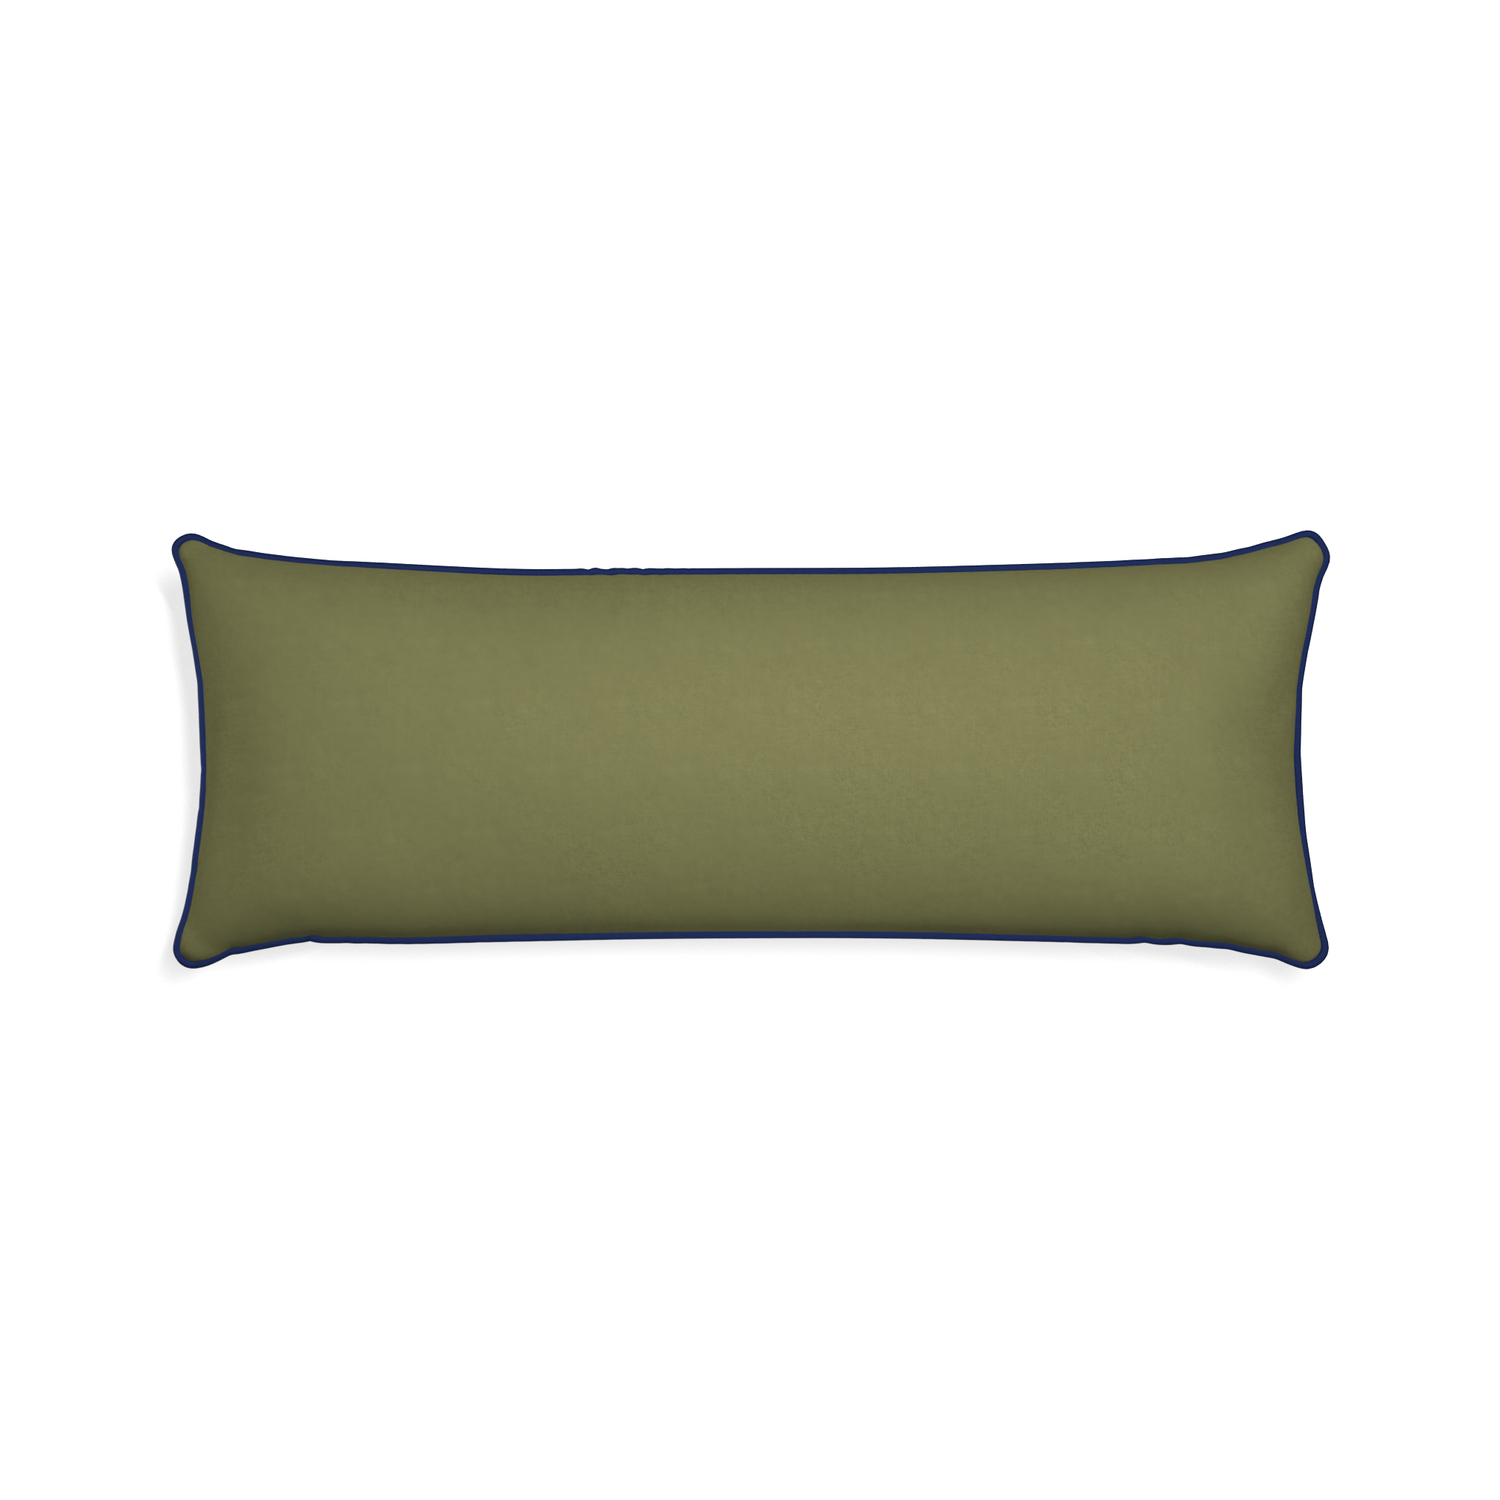 Xl-lumbar moss custom moss greenpillow with midnight piping on white background